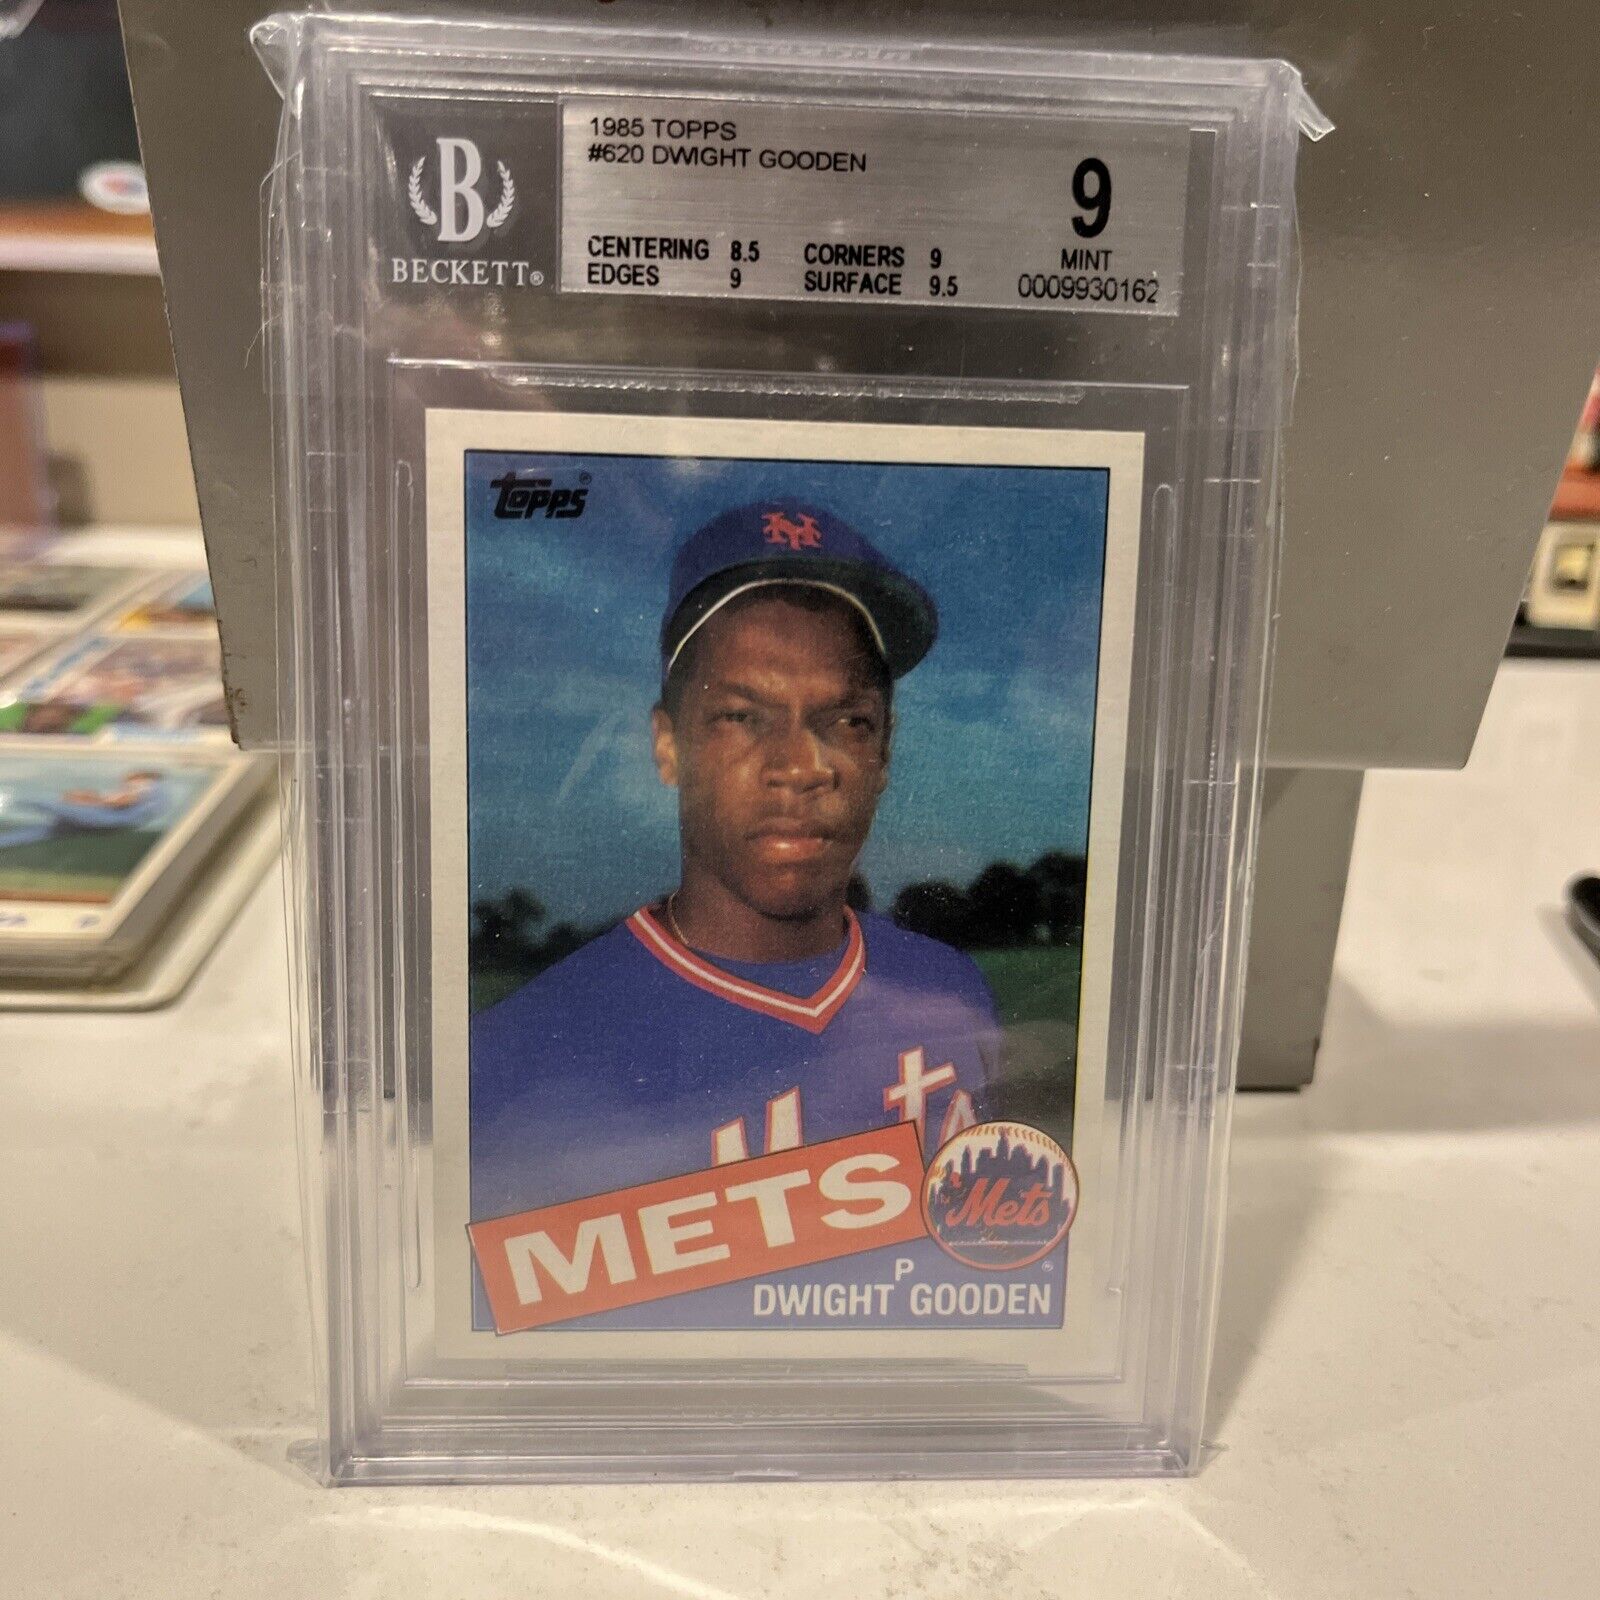 1985 Topps DWIGHT GOODEN RC Mets #620 BGS 9, w/ 9.5 Mint